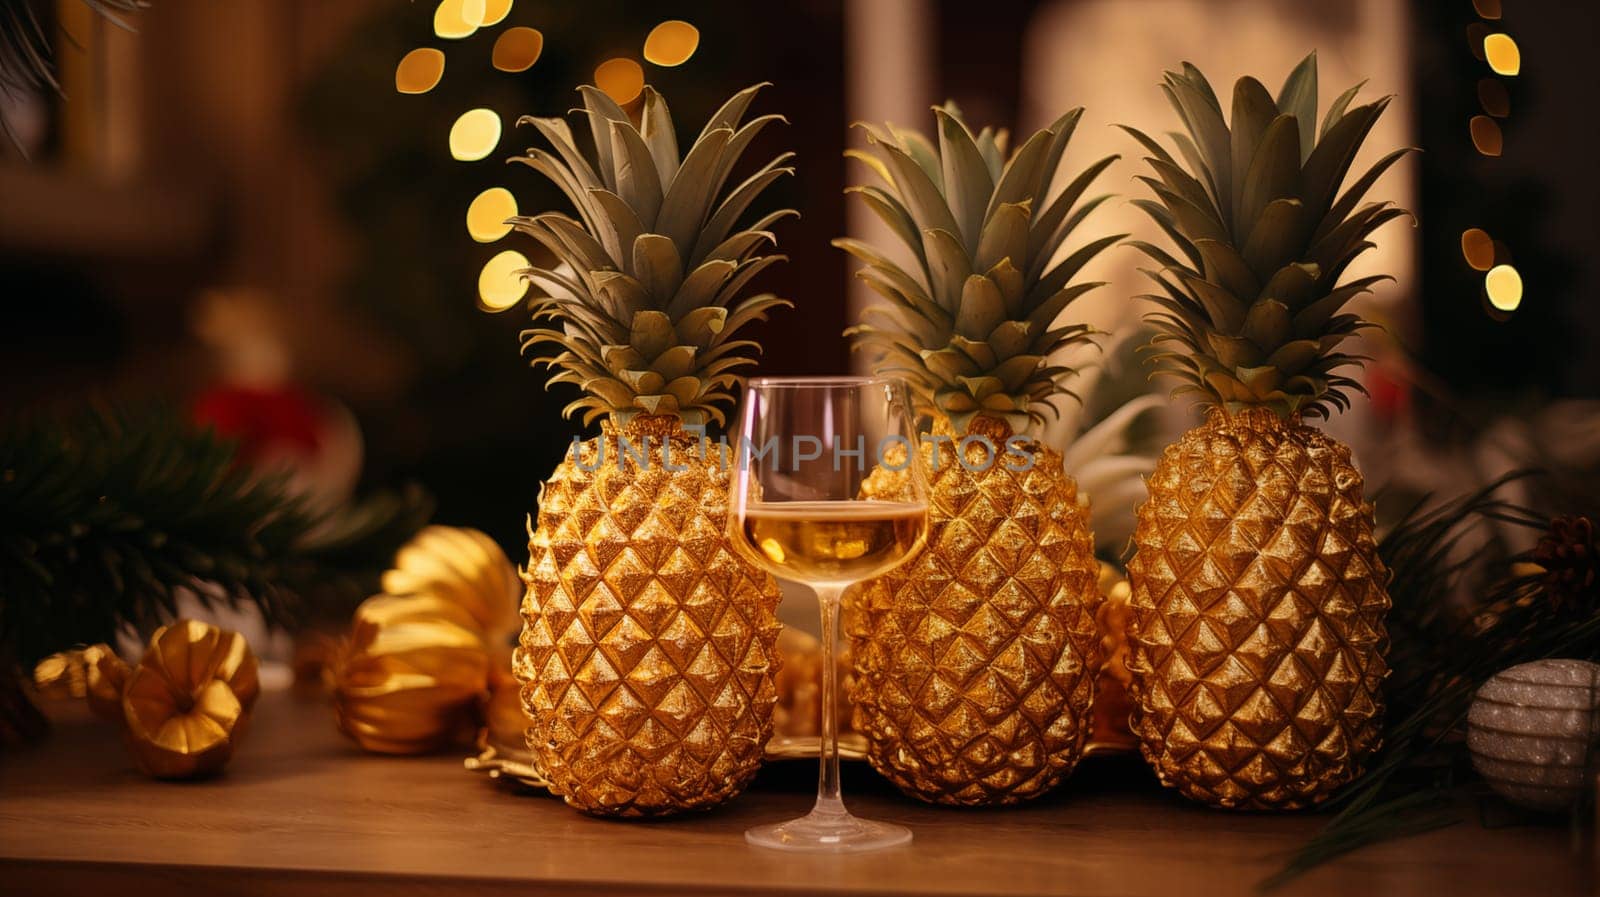 Three golden pineapples and glass of champagne, stand on plates on the table, warm evening light.